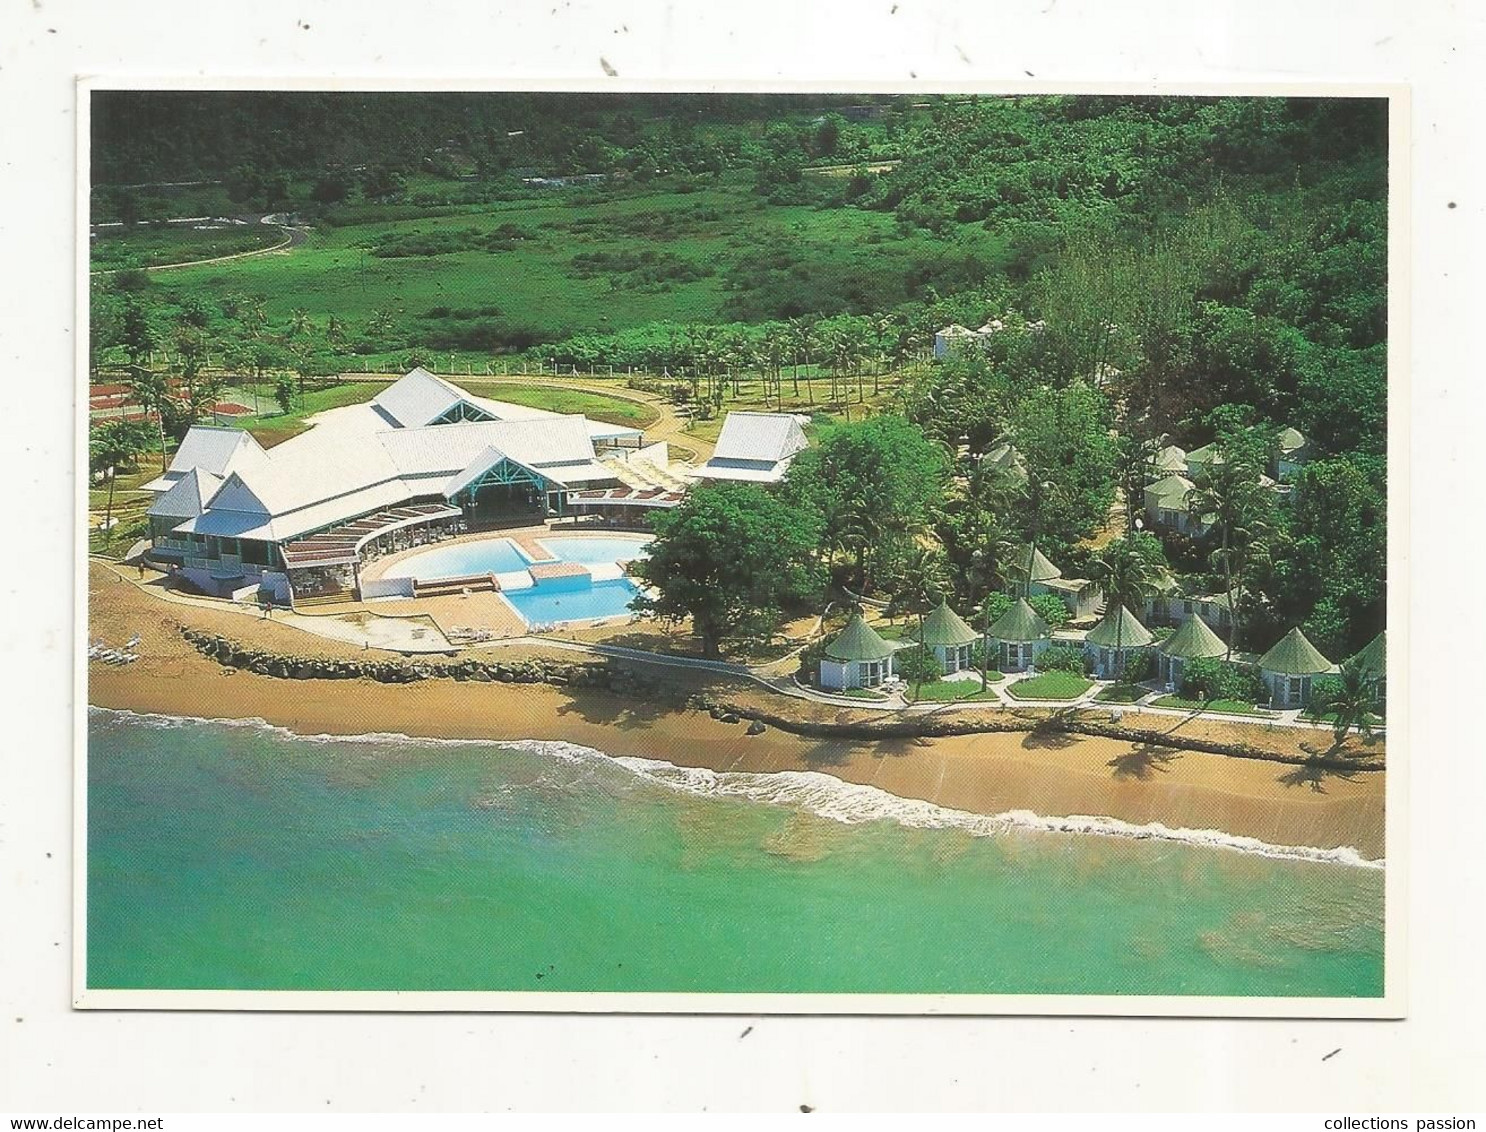 Cp , GUADELOUPE,BASSE TERRE ,hôtel FORT ROYAL ,photo E. Valentin ,vierge - Basse Terre